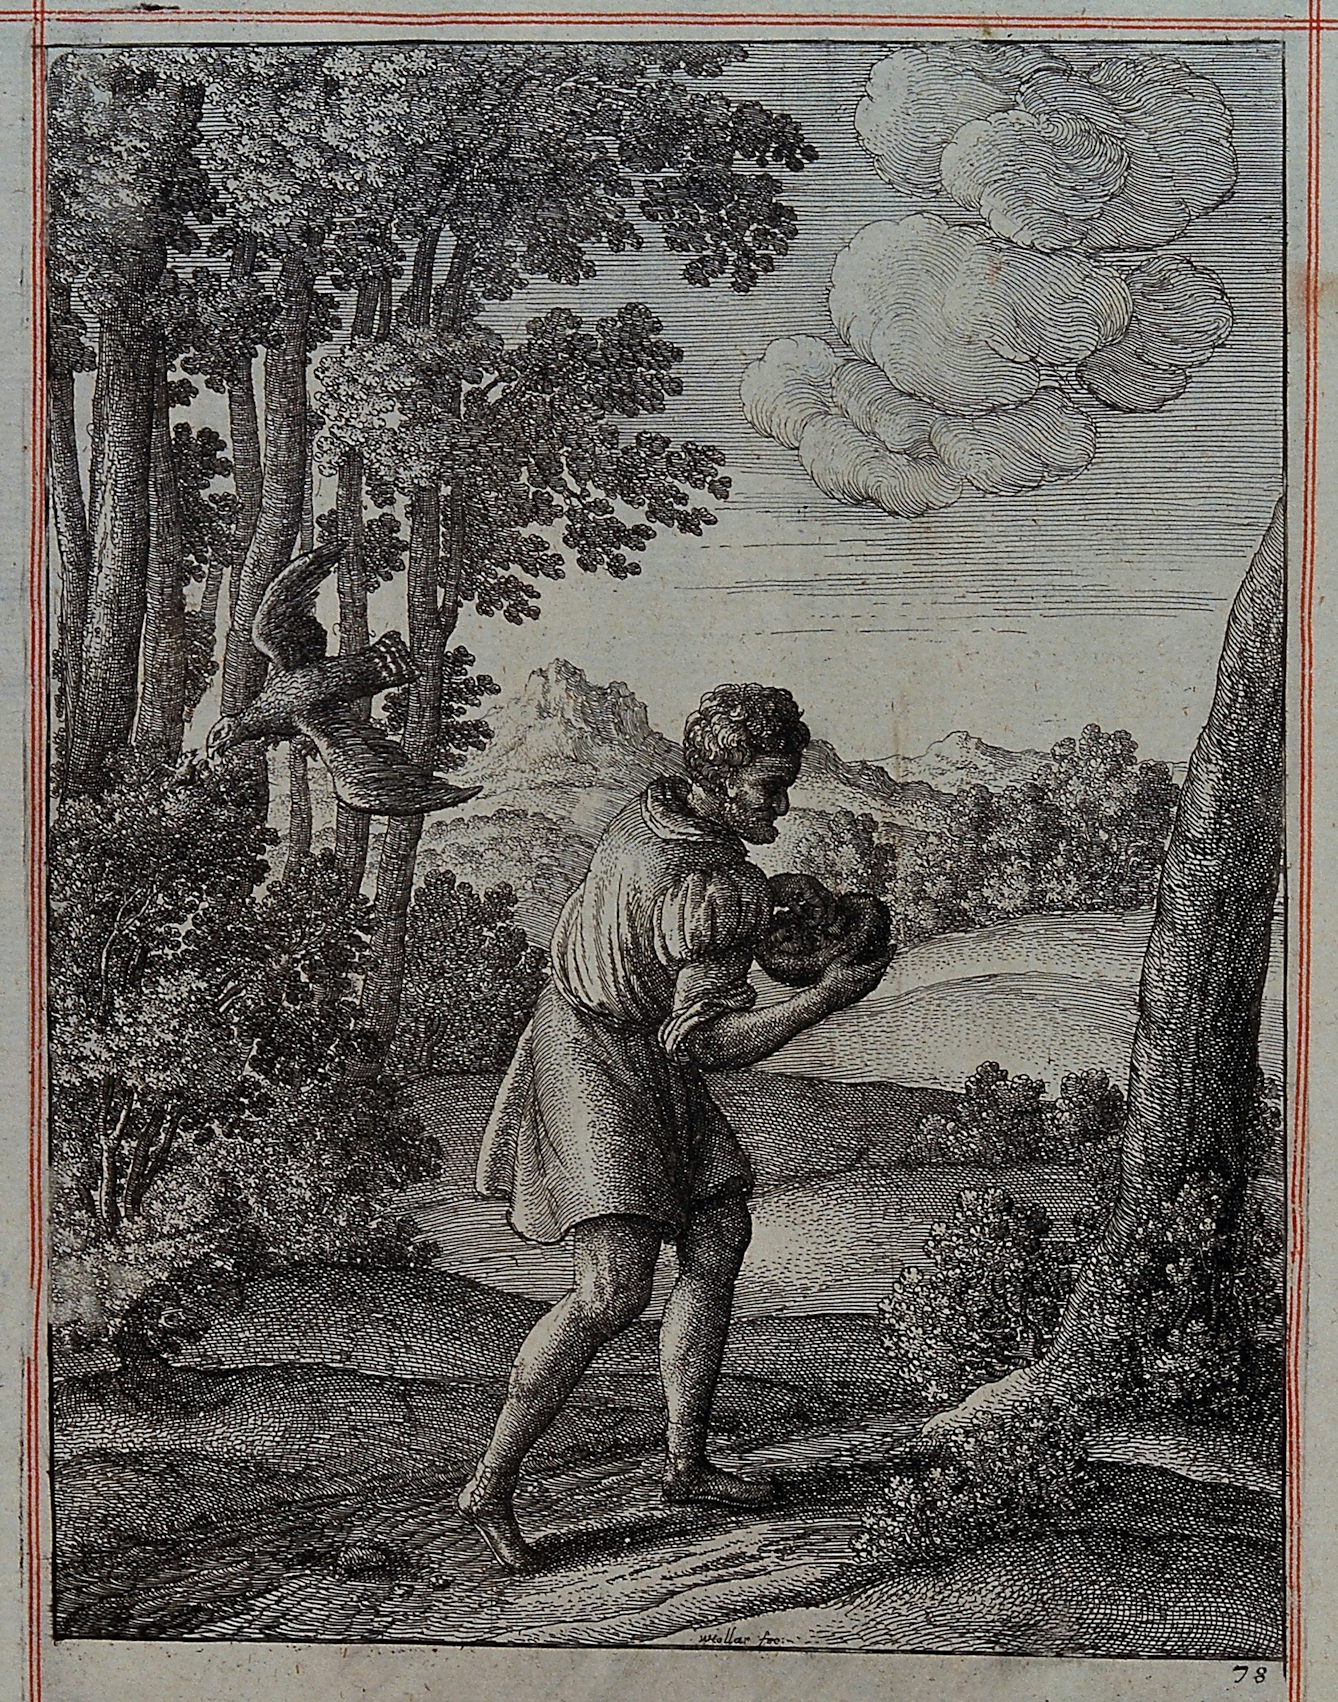 Etching showing a peasant carrying the nest of a nightingale, which is is sitting on a bush and is about to be swooped by a hawk